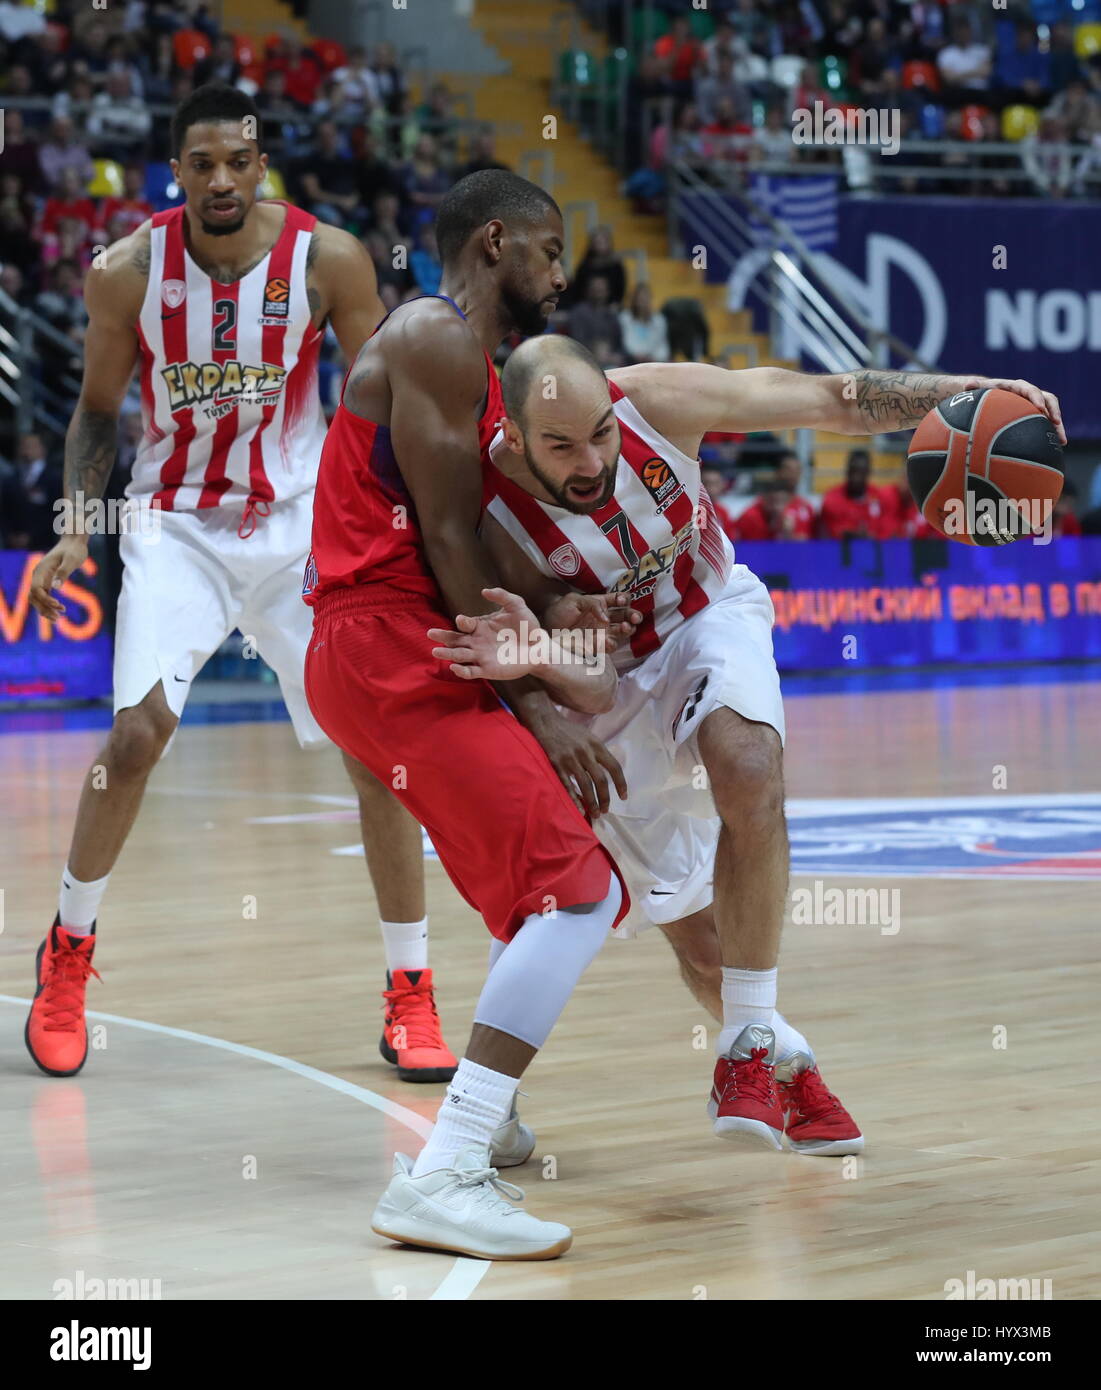 Moscow, Russia. 7th Apr, 2017. CSKA Moscow's Cory Higgins, Olympiacos  Piraeus' Vassilis Spanoulis (L-R front) and Olympiacos Piraeus' Khem Birch  (background) in action in their 2016-17 Euroleague Regular Season Round 30  basketball